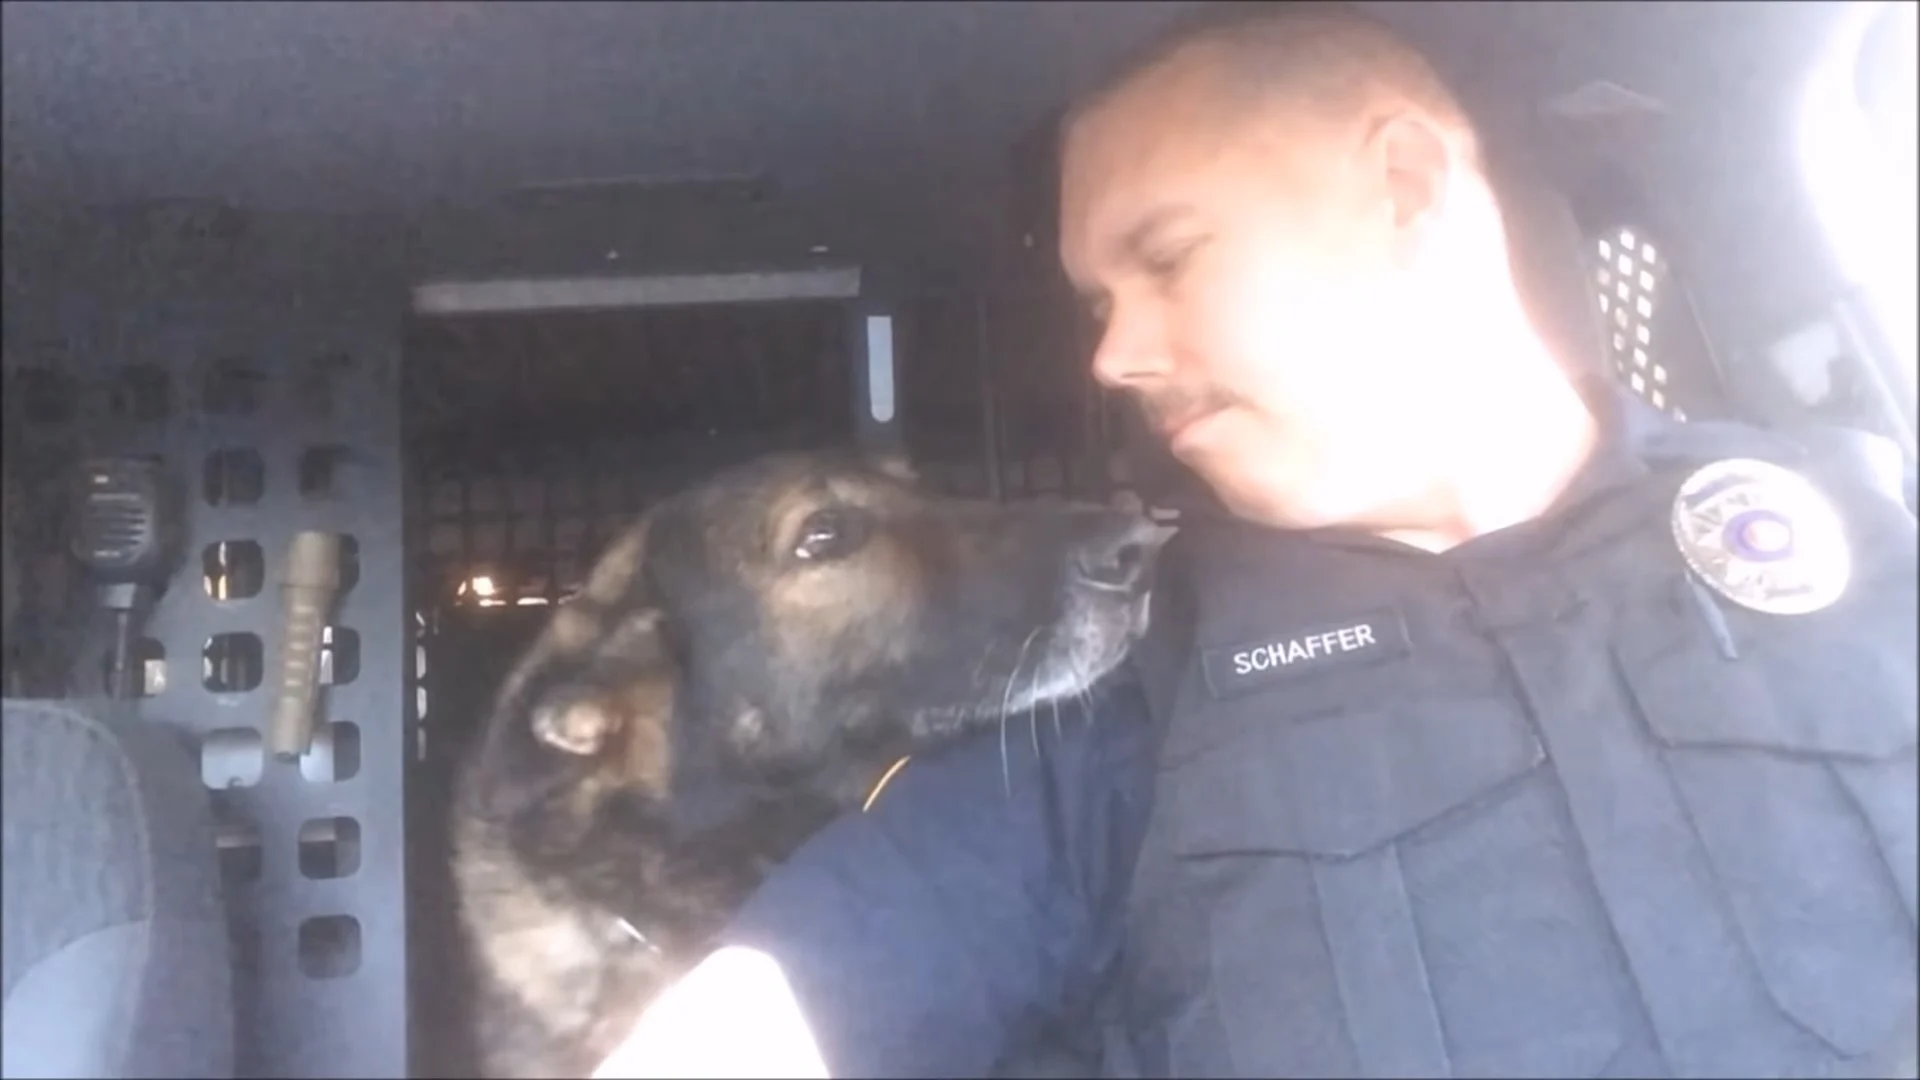 k9 officer and german shepherd dog looking at each other in the car